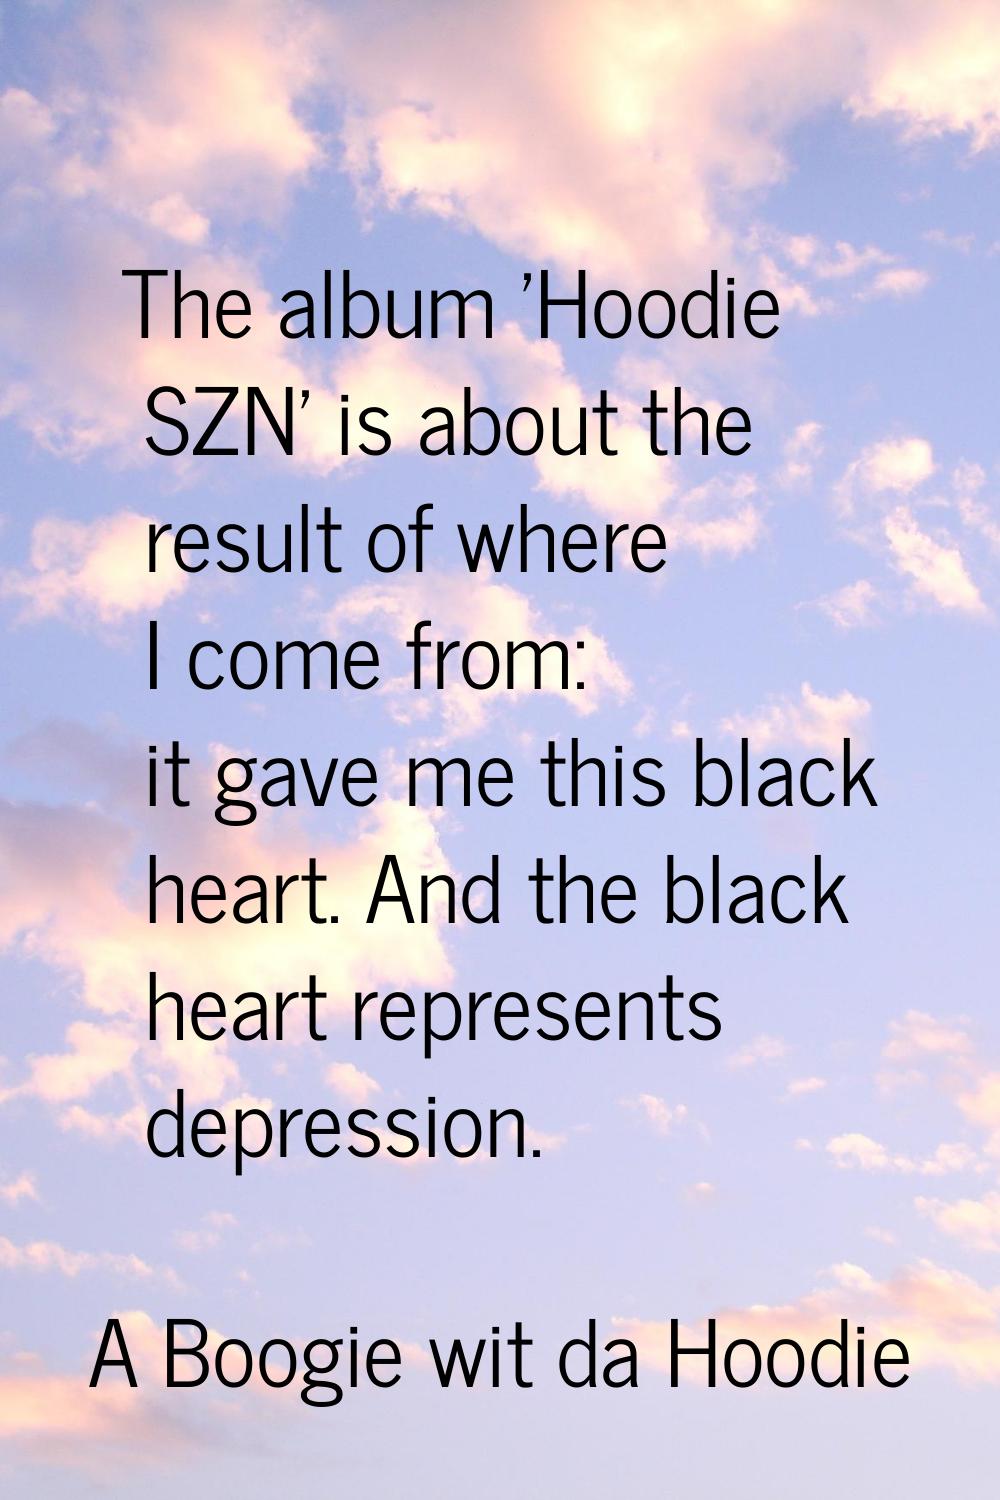 The album 'Hoodie SZN' is about the result of where I come from: it gave me this black heart. And t